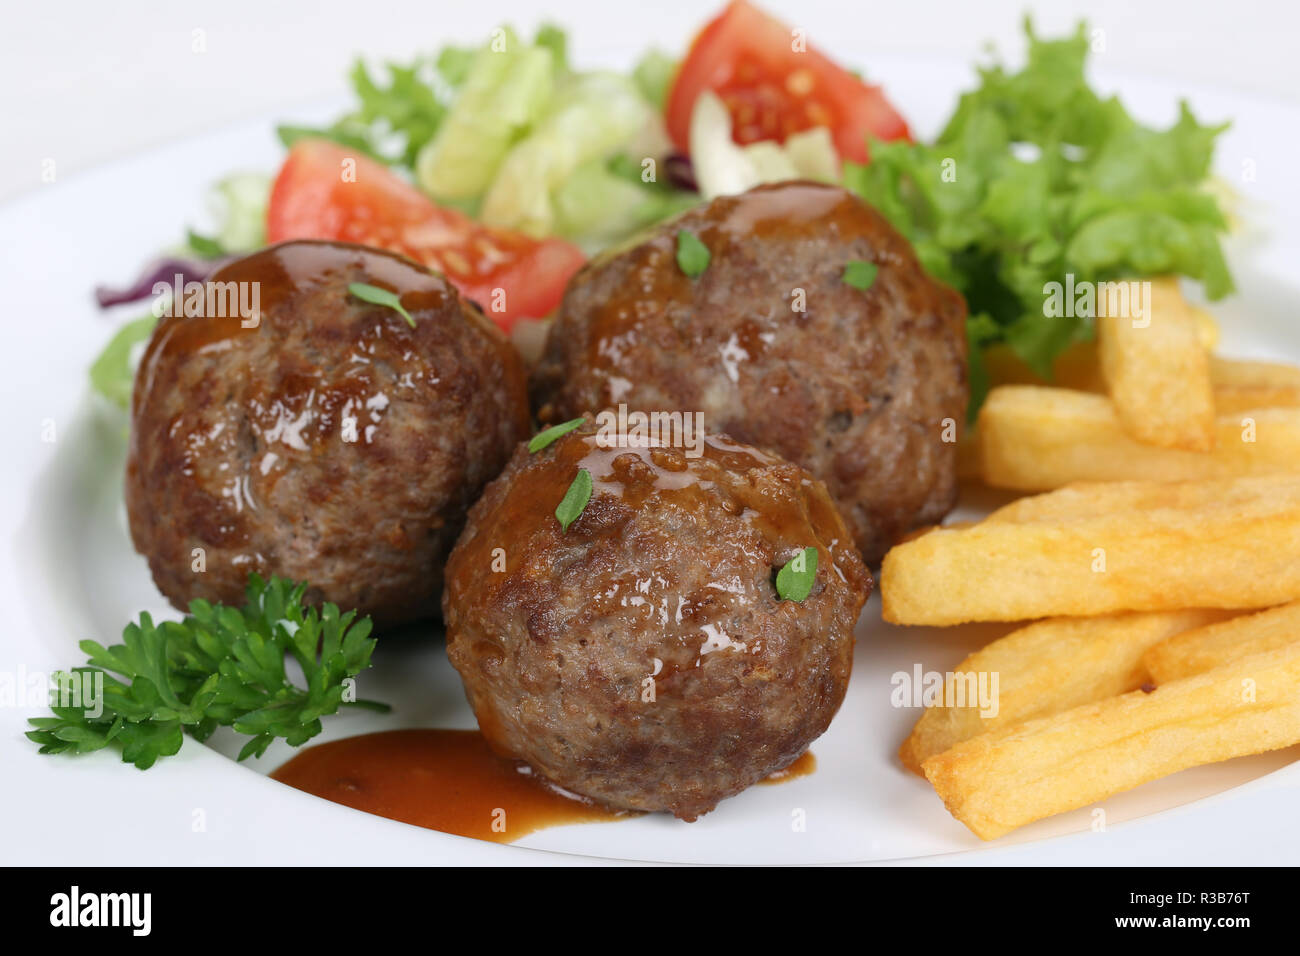 meatballs or meatballs dish with fries and salad Stock Photo